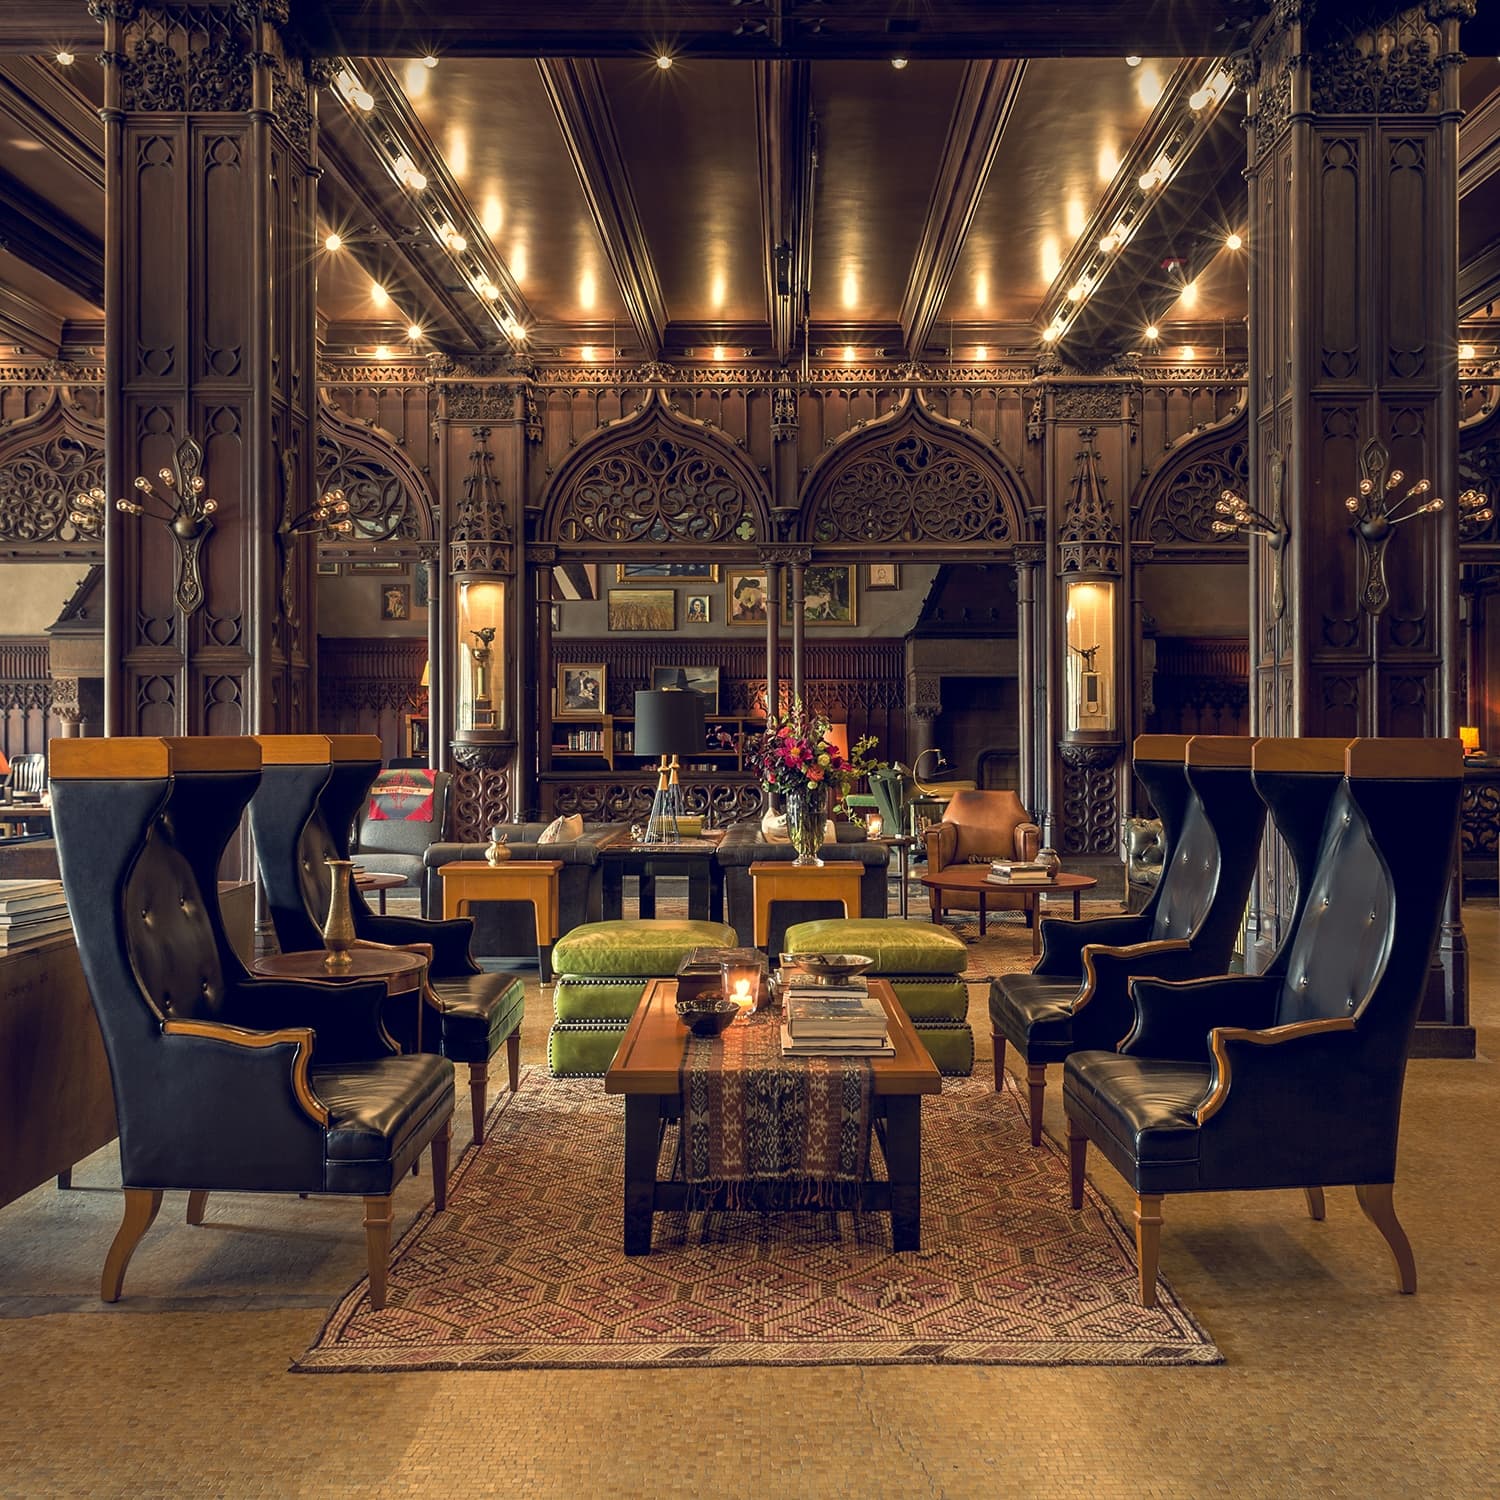 The Chicago Athletic Association (CAA) is a quintessential Roman and Williams project. A touch of disorder in the new space draws in a younger generation, with a brave desire to balance it with references of its rich past. Image Credit: Alan Shortall